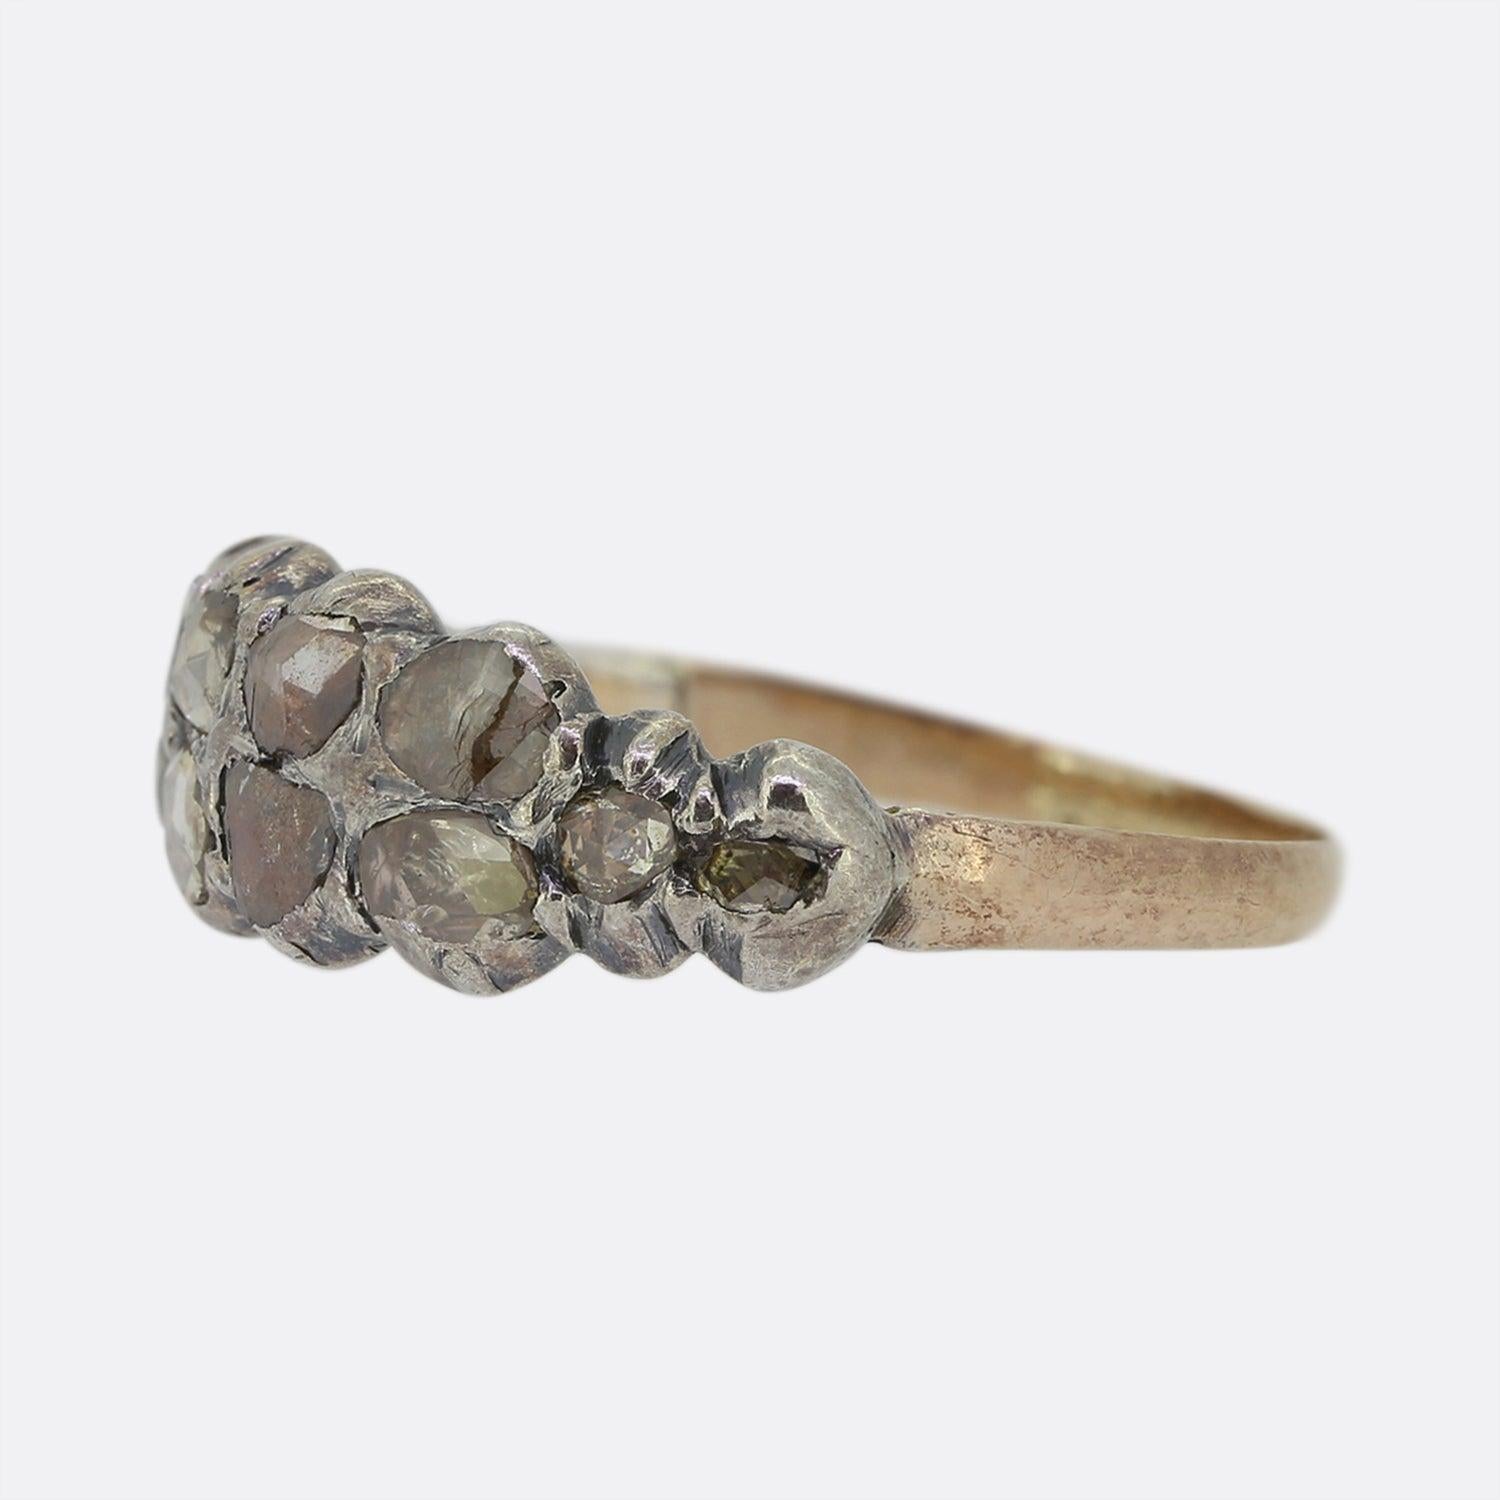 This is a wonderful antique Georgian diamond ring. The ring features 12 rose cut diamonds that are set in silver in a typical Georgian style. This ring sits low on the finger so it is quite a practical ring to wear, although it is important to treat